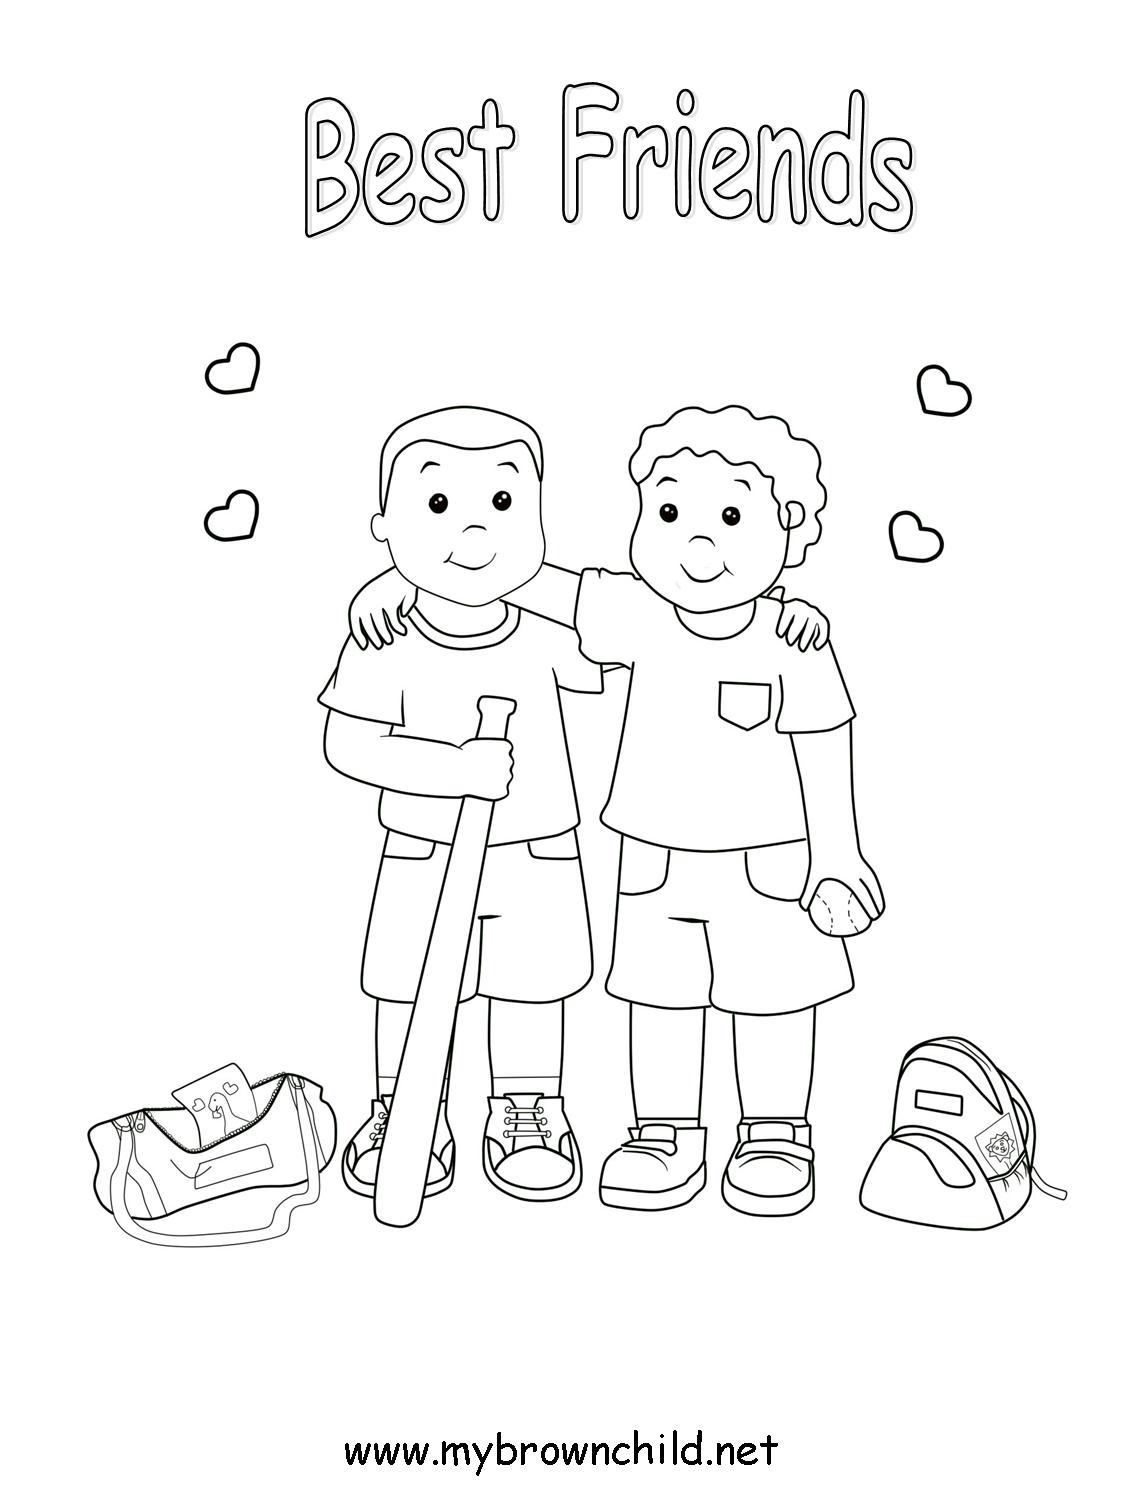 Best Friends Coloring Pictures - Coloring Pages for Kids and for ...